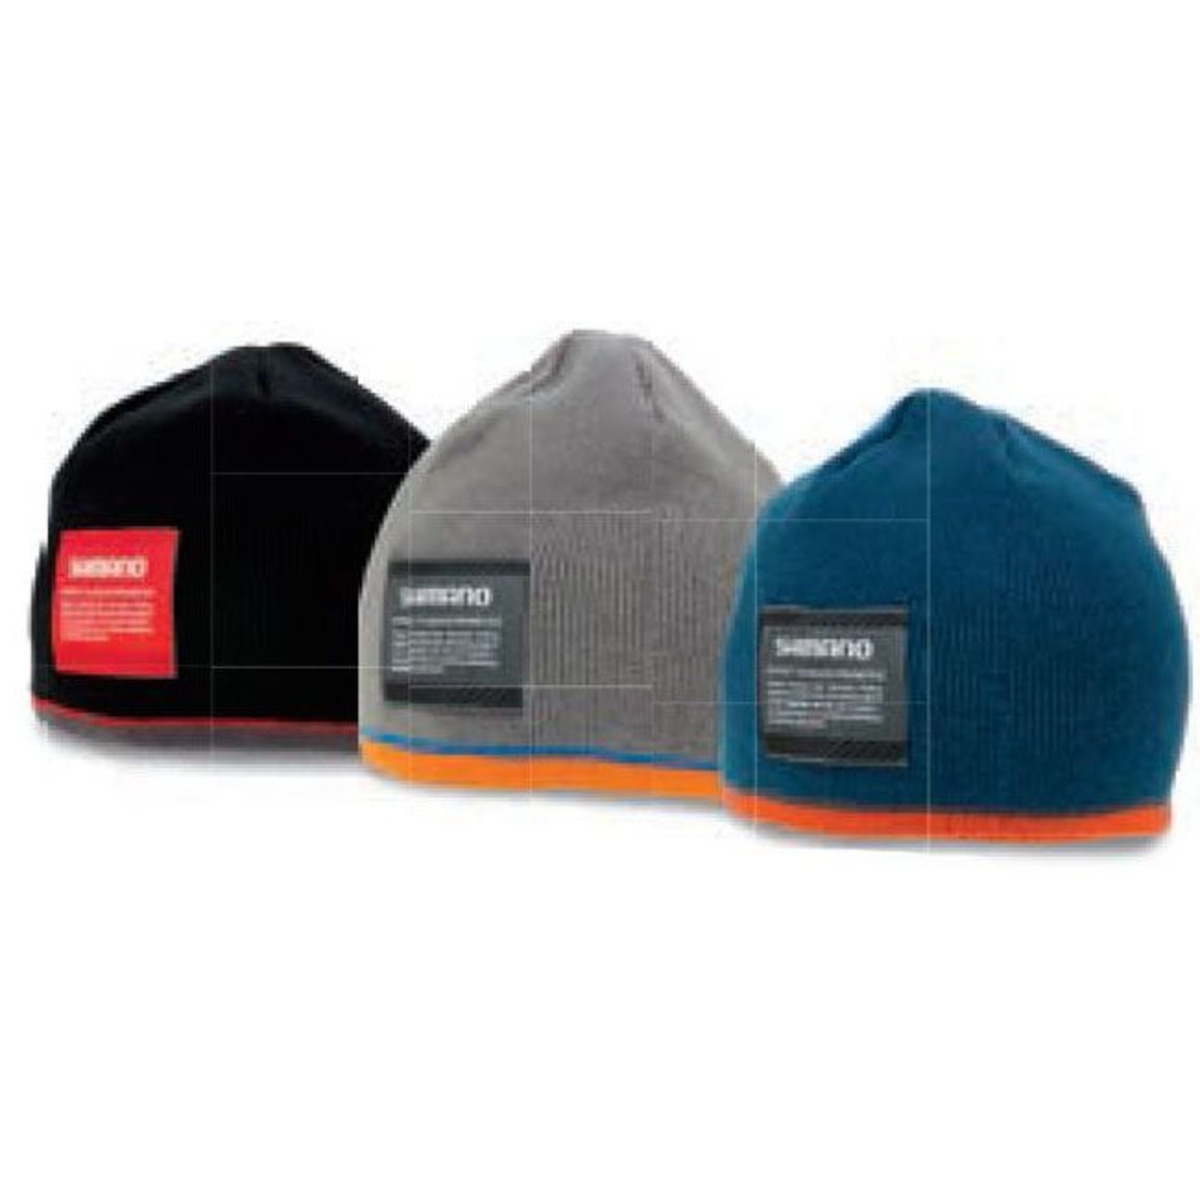 Shimano Cappellino Knit Watch - Teal